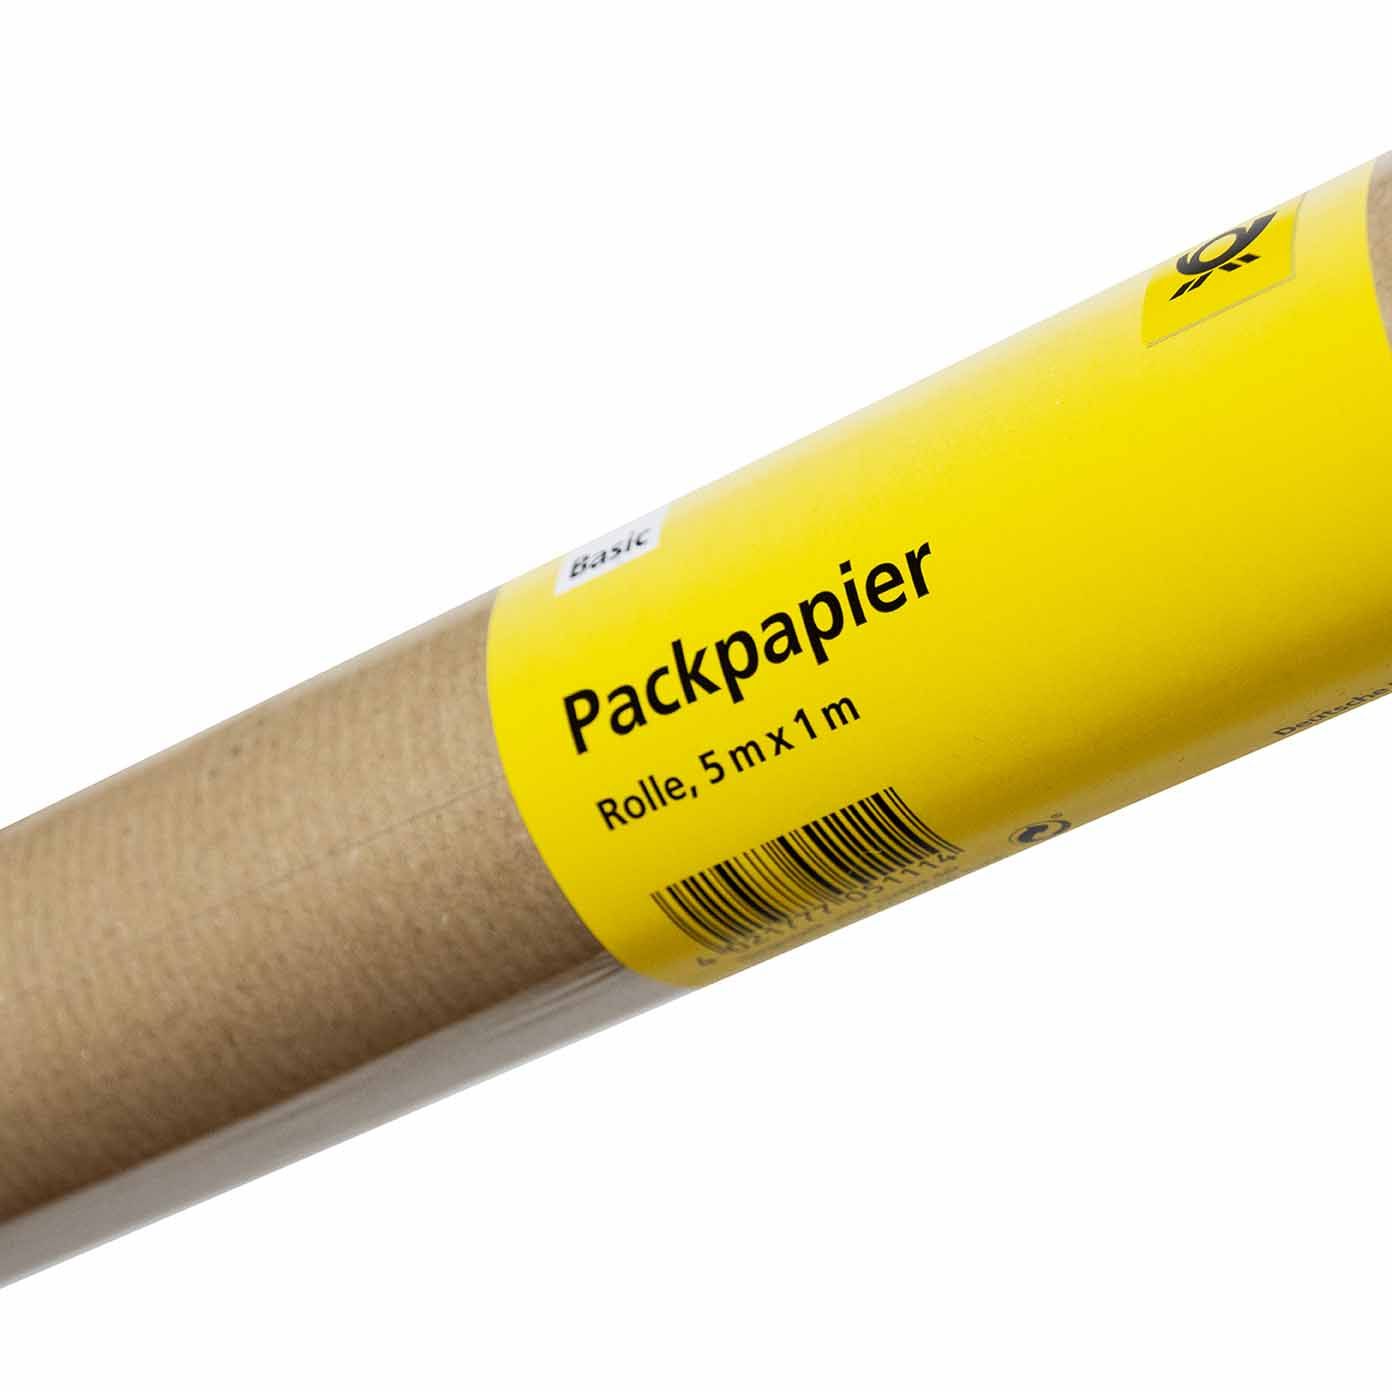 Packpapier Rolle, 5 m x  1 m